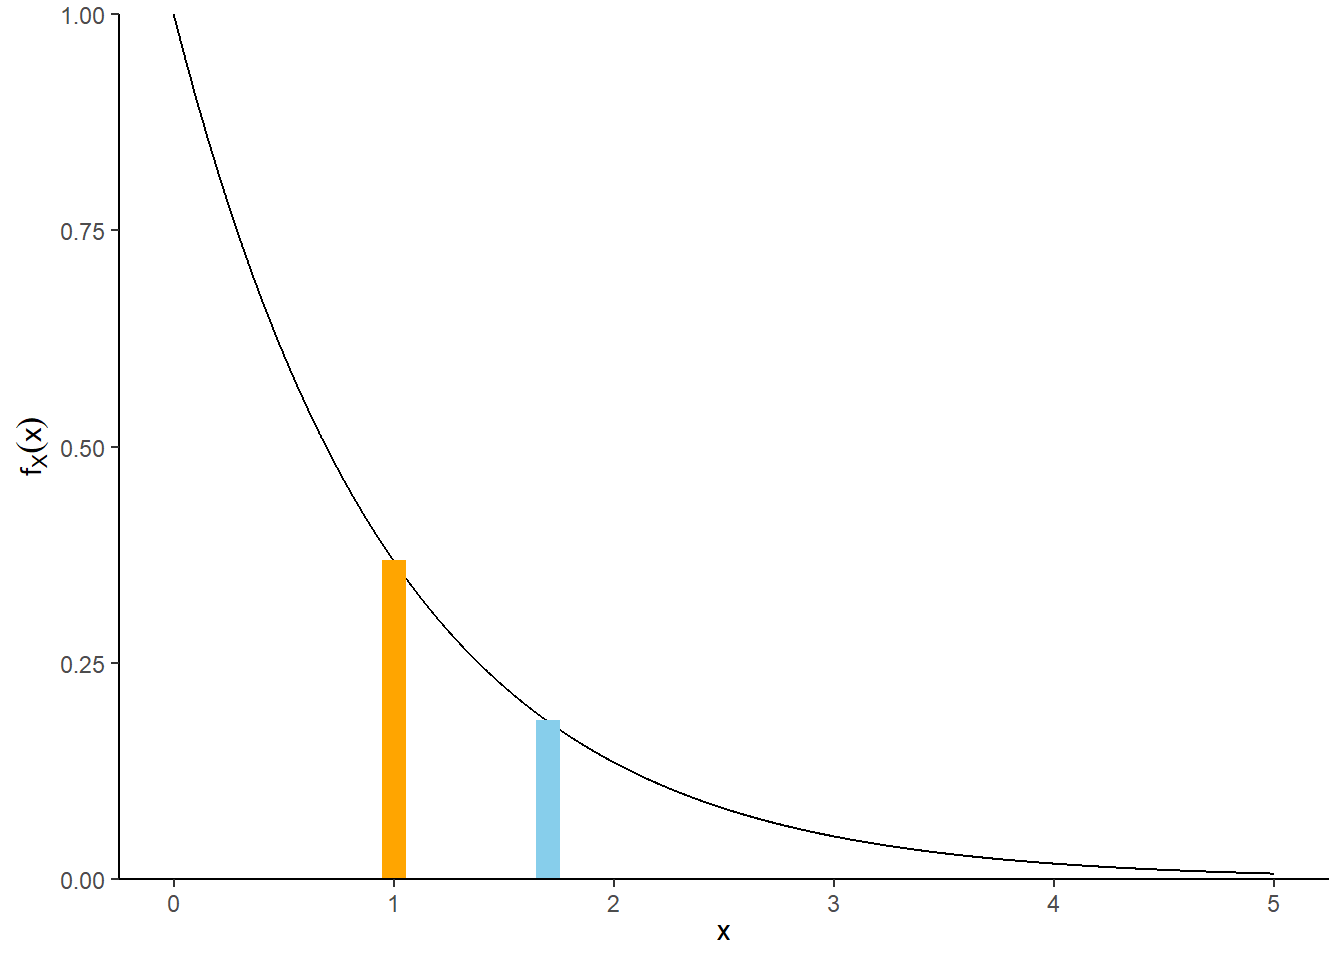 Illustration of \(\textrm{P}(0.995<X<1.005)\) (orange) and \(\textrm{P}(1.695<X<1.705)\) (blue) for \(X\) with an Exponential(1) distribution. The plot illustrates how the probability that \(X\) is “close to” \(x\) can be approximated by the area of a rectangle with height equal to the density at \(x\), \(f_X(x)\). The density height at \(x = 1\) is roughly twice as large than the density height at \(x = 1.7\) so the probability that \(X\) is “close to” 1 is (roughly) twice as large as the probability that \(X\) is “close to” 1.7.